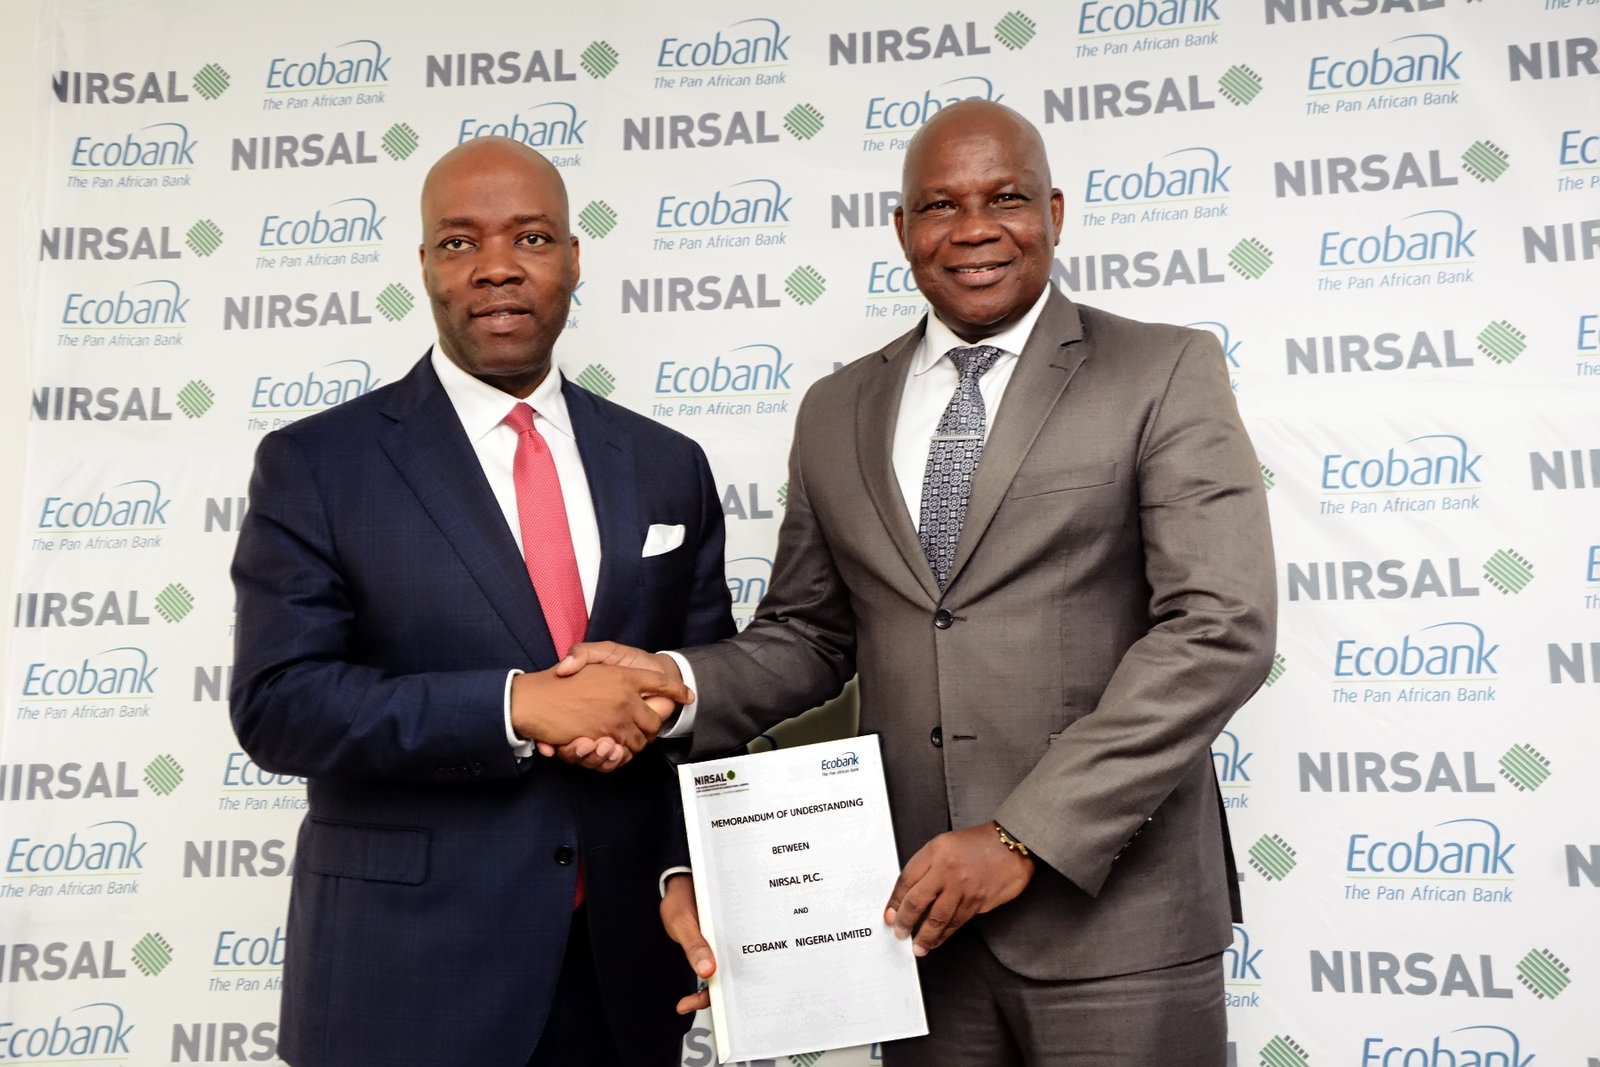 Ecobank partners NIRSAL on a N70 billion MoU commitment for Agriculture Financing